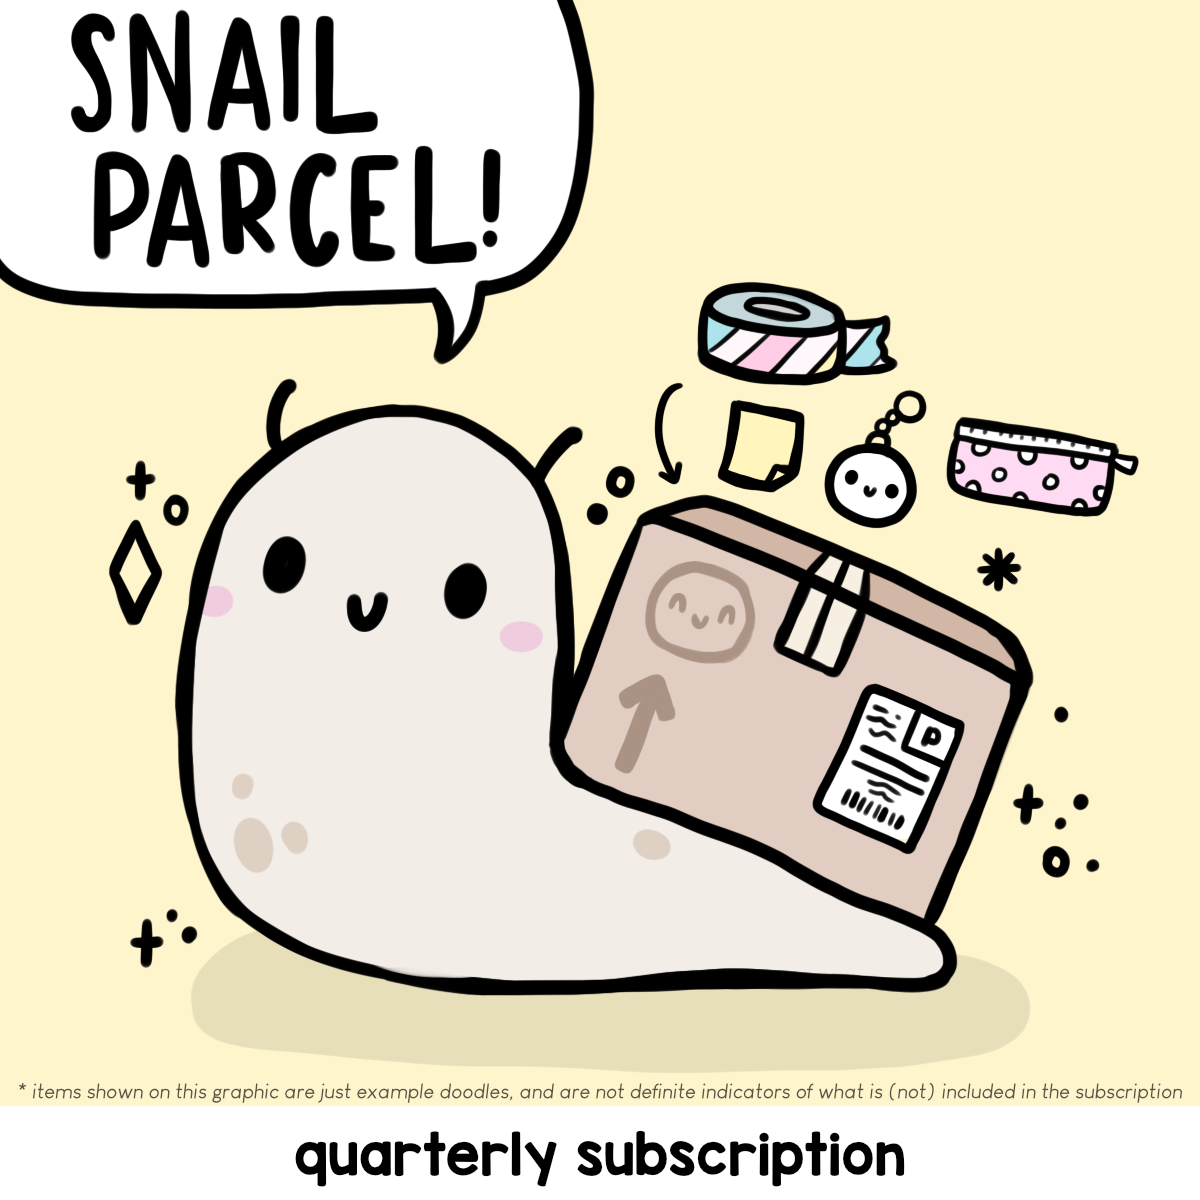 Snail Parcel Stationery Subscription - Must Be Purchased Alone